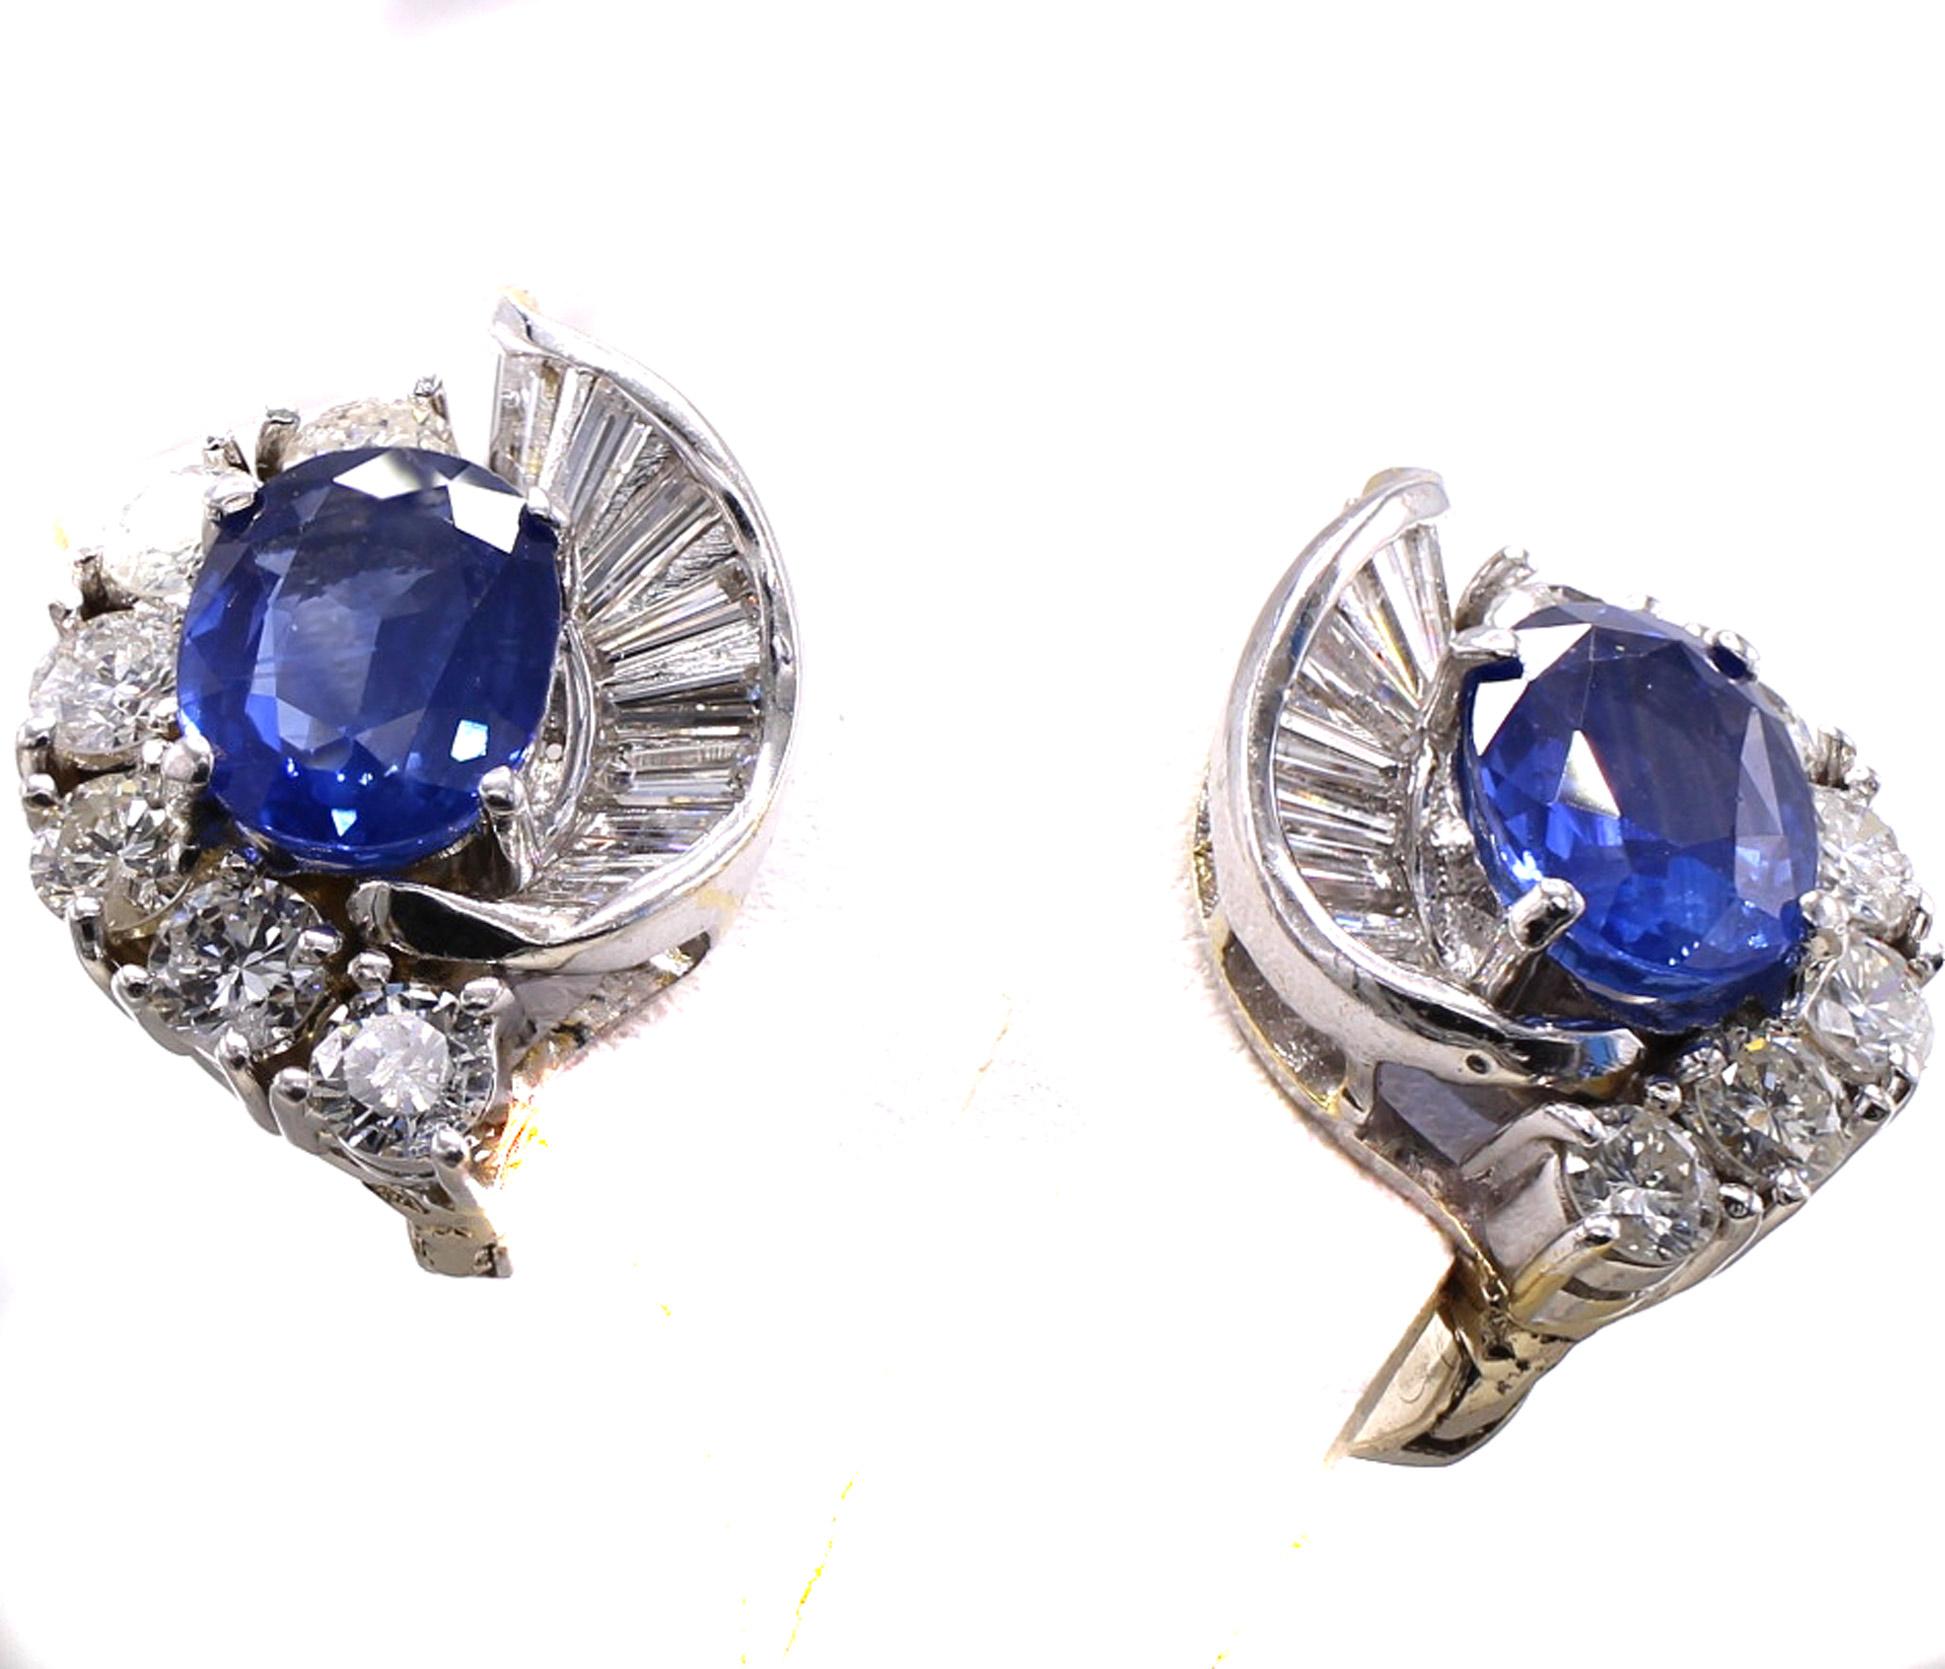 Beautifully designed clip-on earrings with a pair of perfectly matched oval deep blue well saturated sapphires weighing approximately 3 carats total. Embellished by bright white sparkly round brilliant cut and baguette cut diamonds weighing